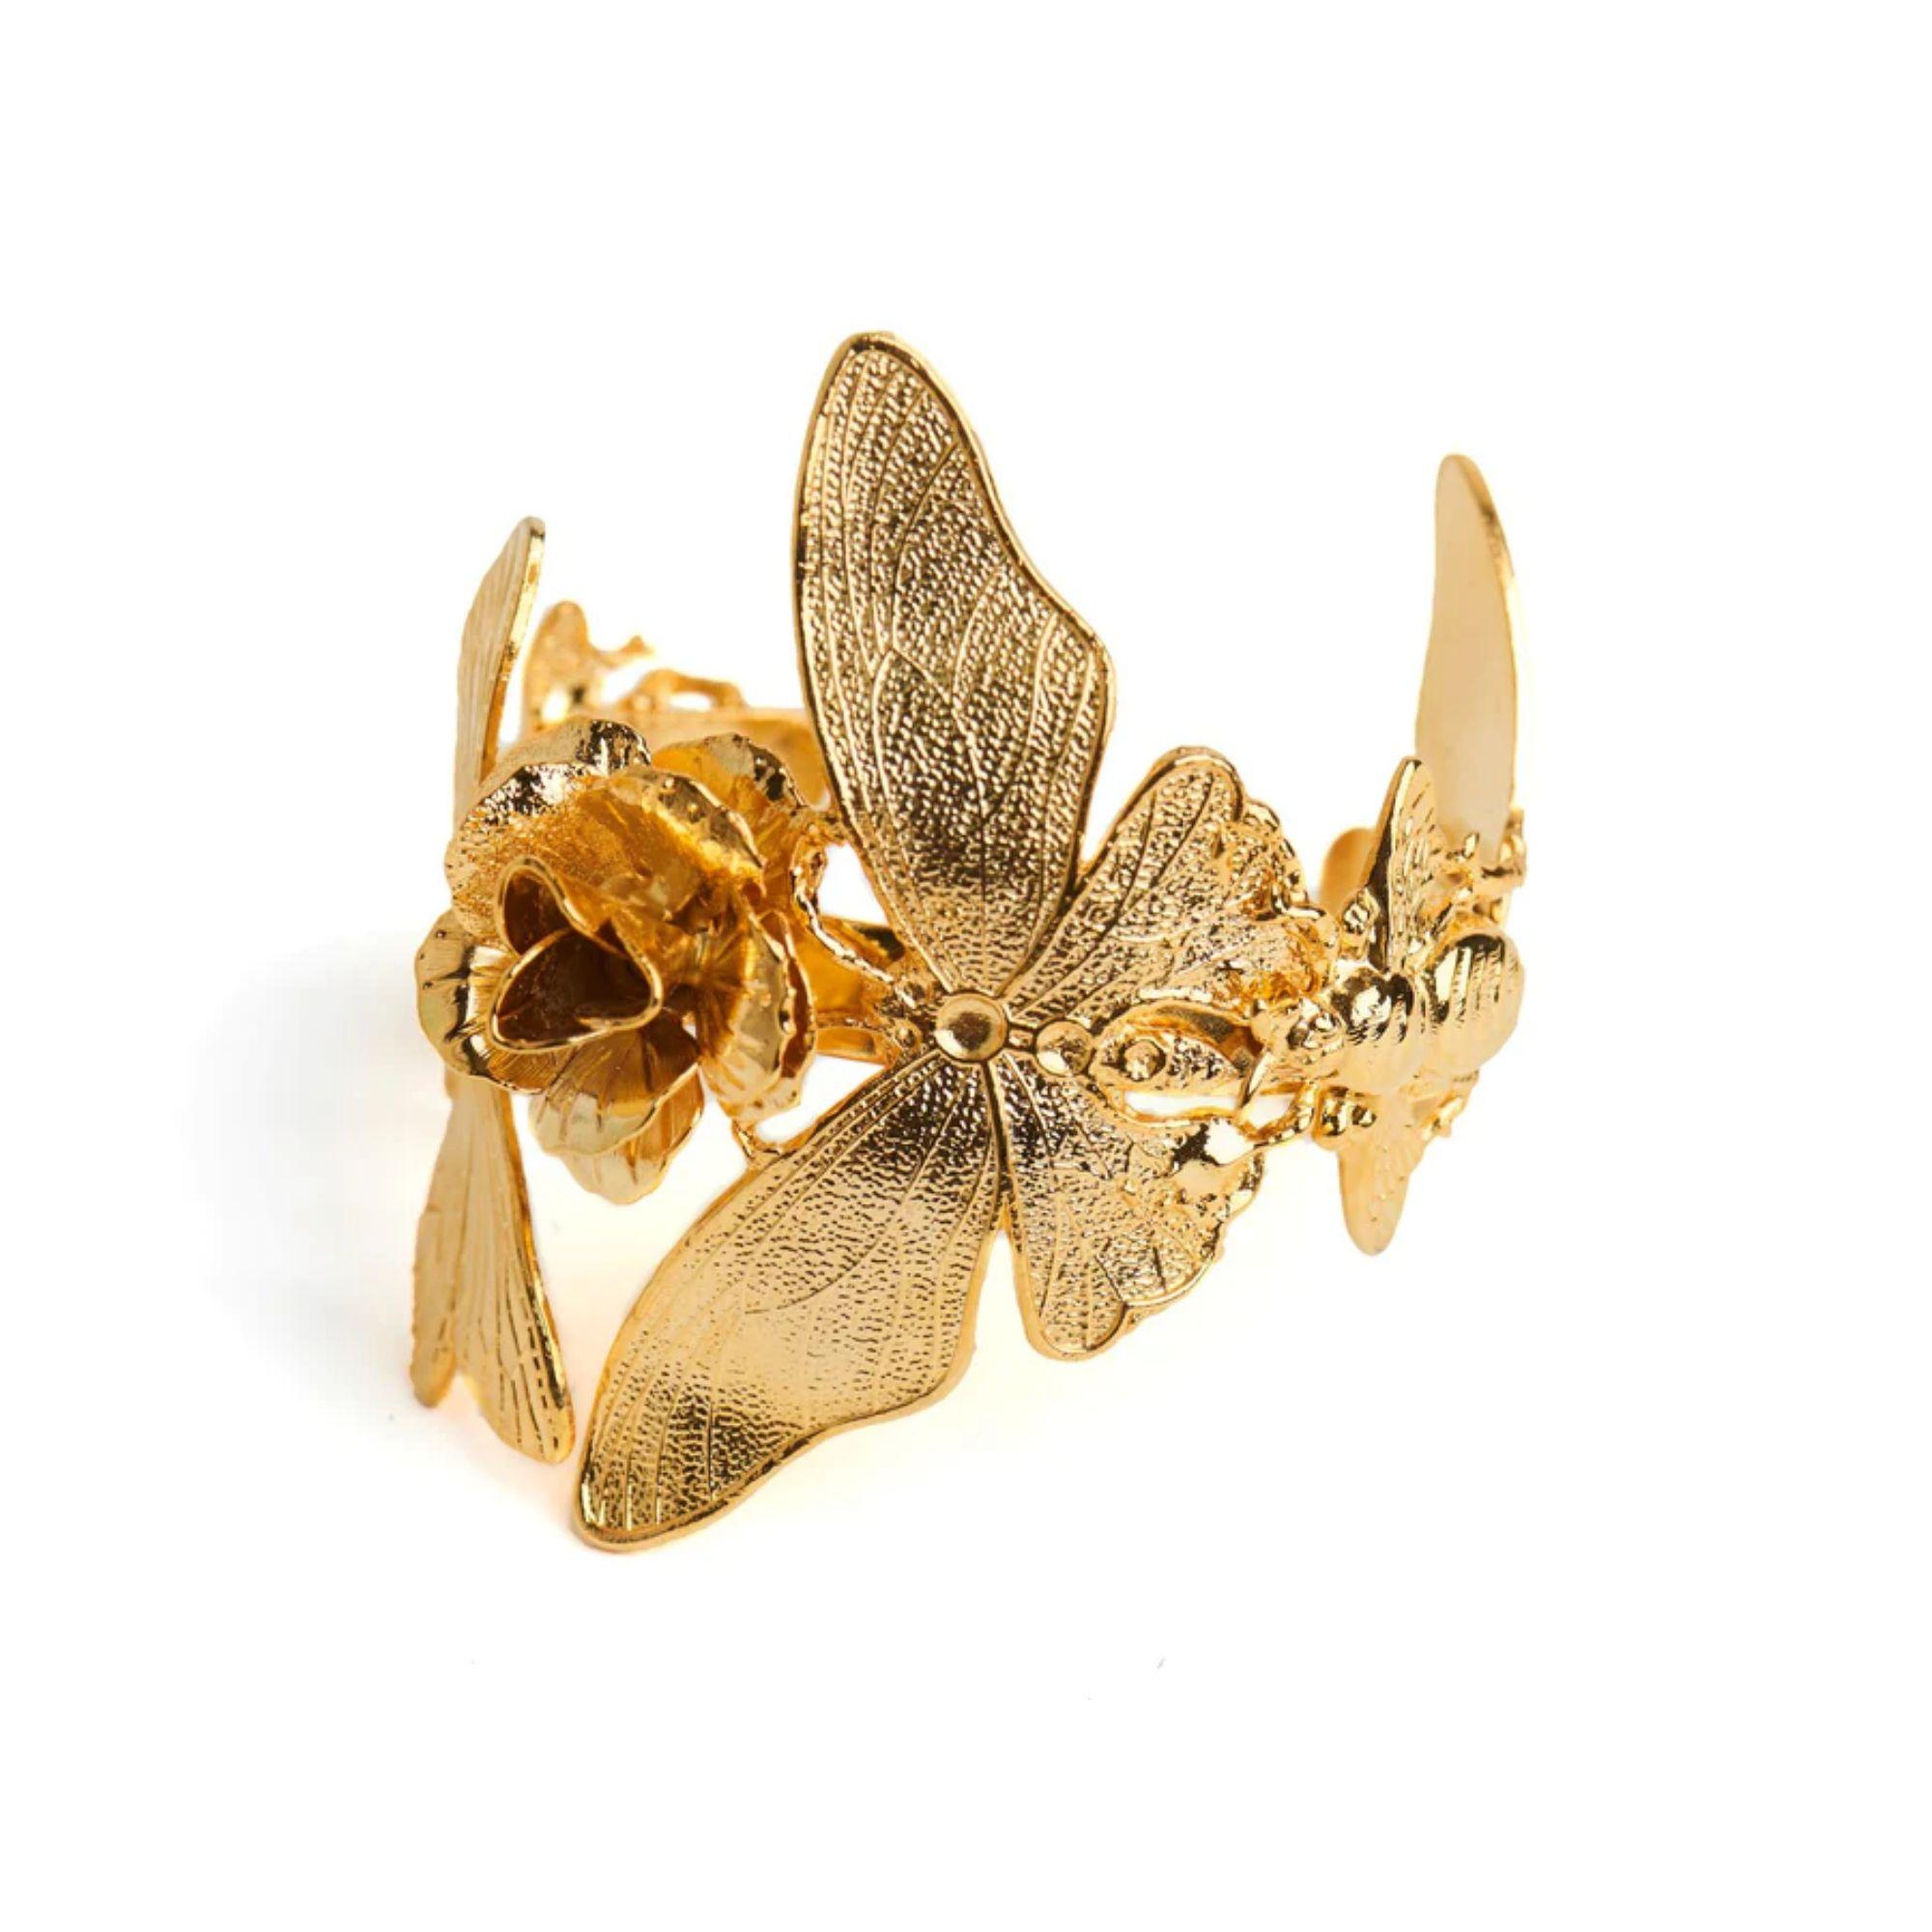 The cuff that puts all of Mordekai's creatures together for a stunning array of an opulent garden and its inhabitants. This luxurious piece really captures the fantasy of the garden of Eden and the majesty of nature. Match it with the rings and